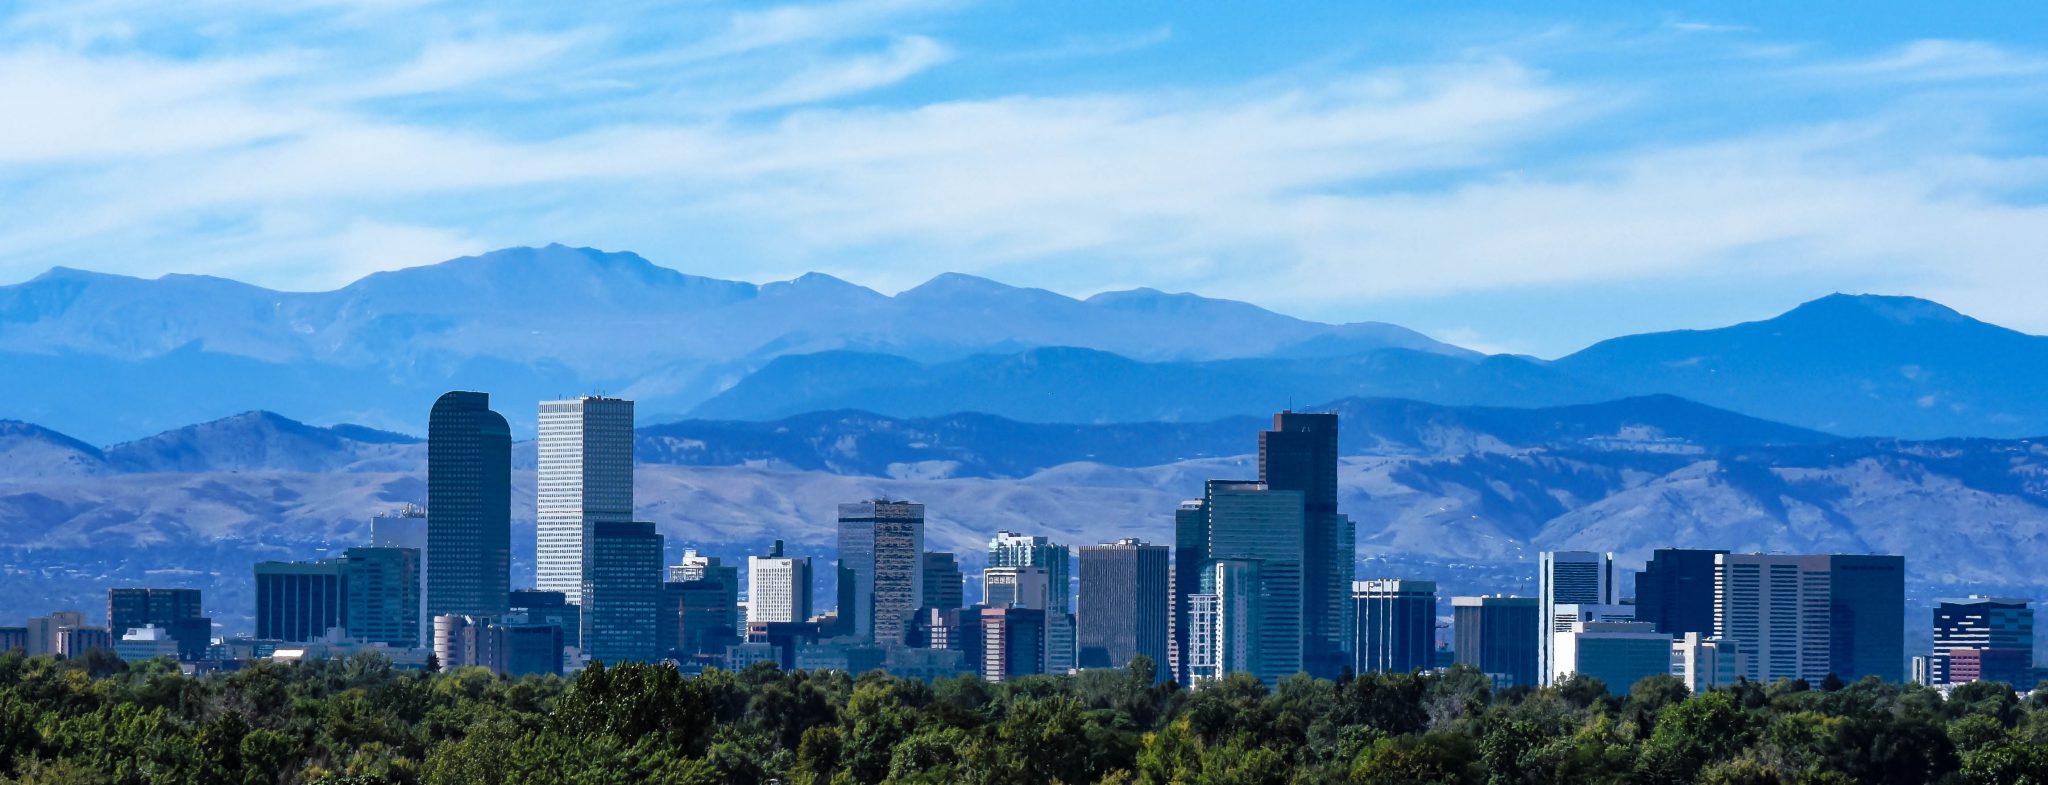 The skyline of Denver, Colorado with the foothills and Rocky Mountains in the distance.